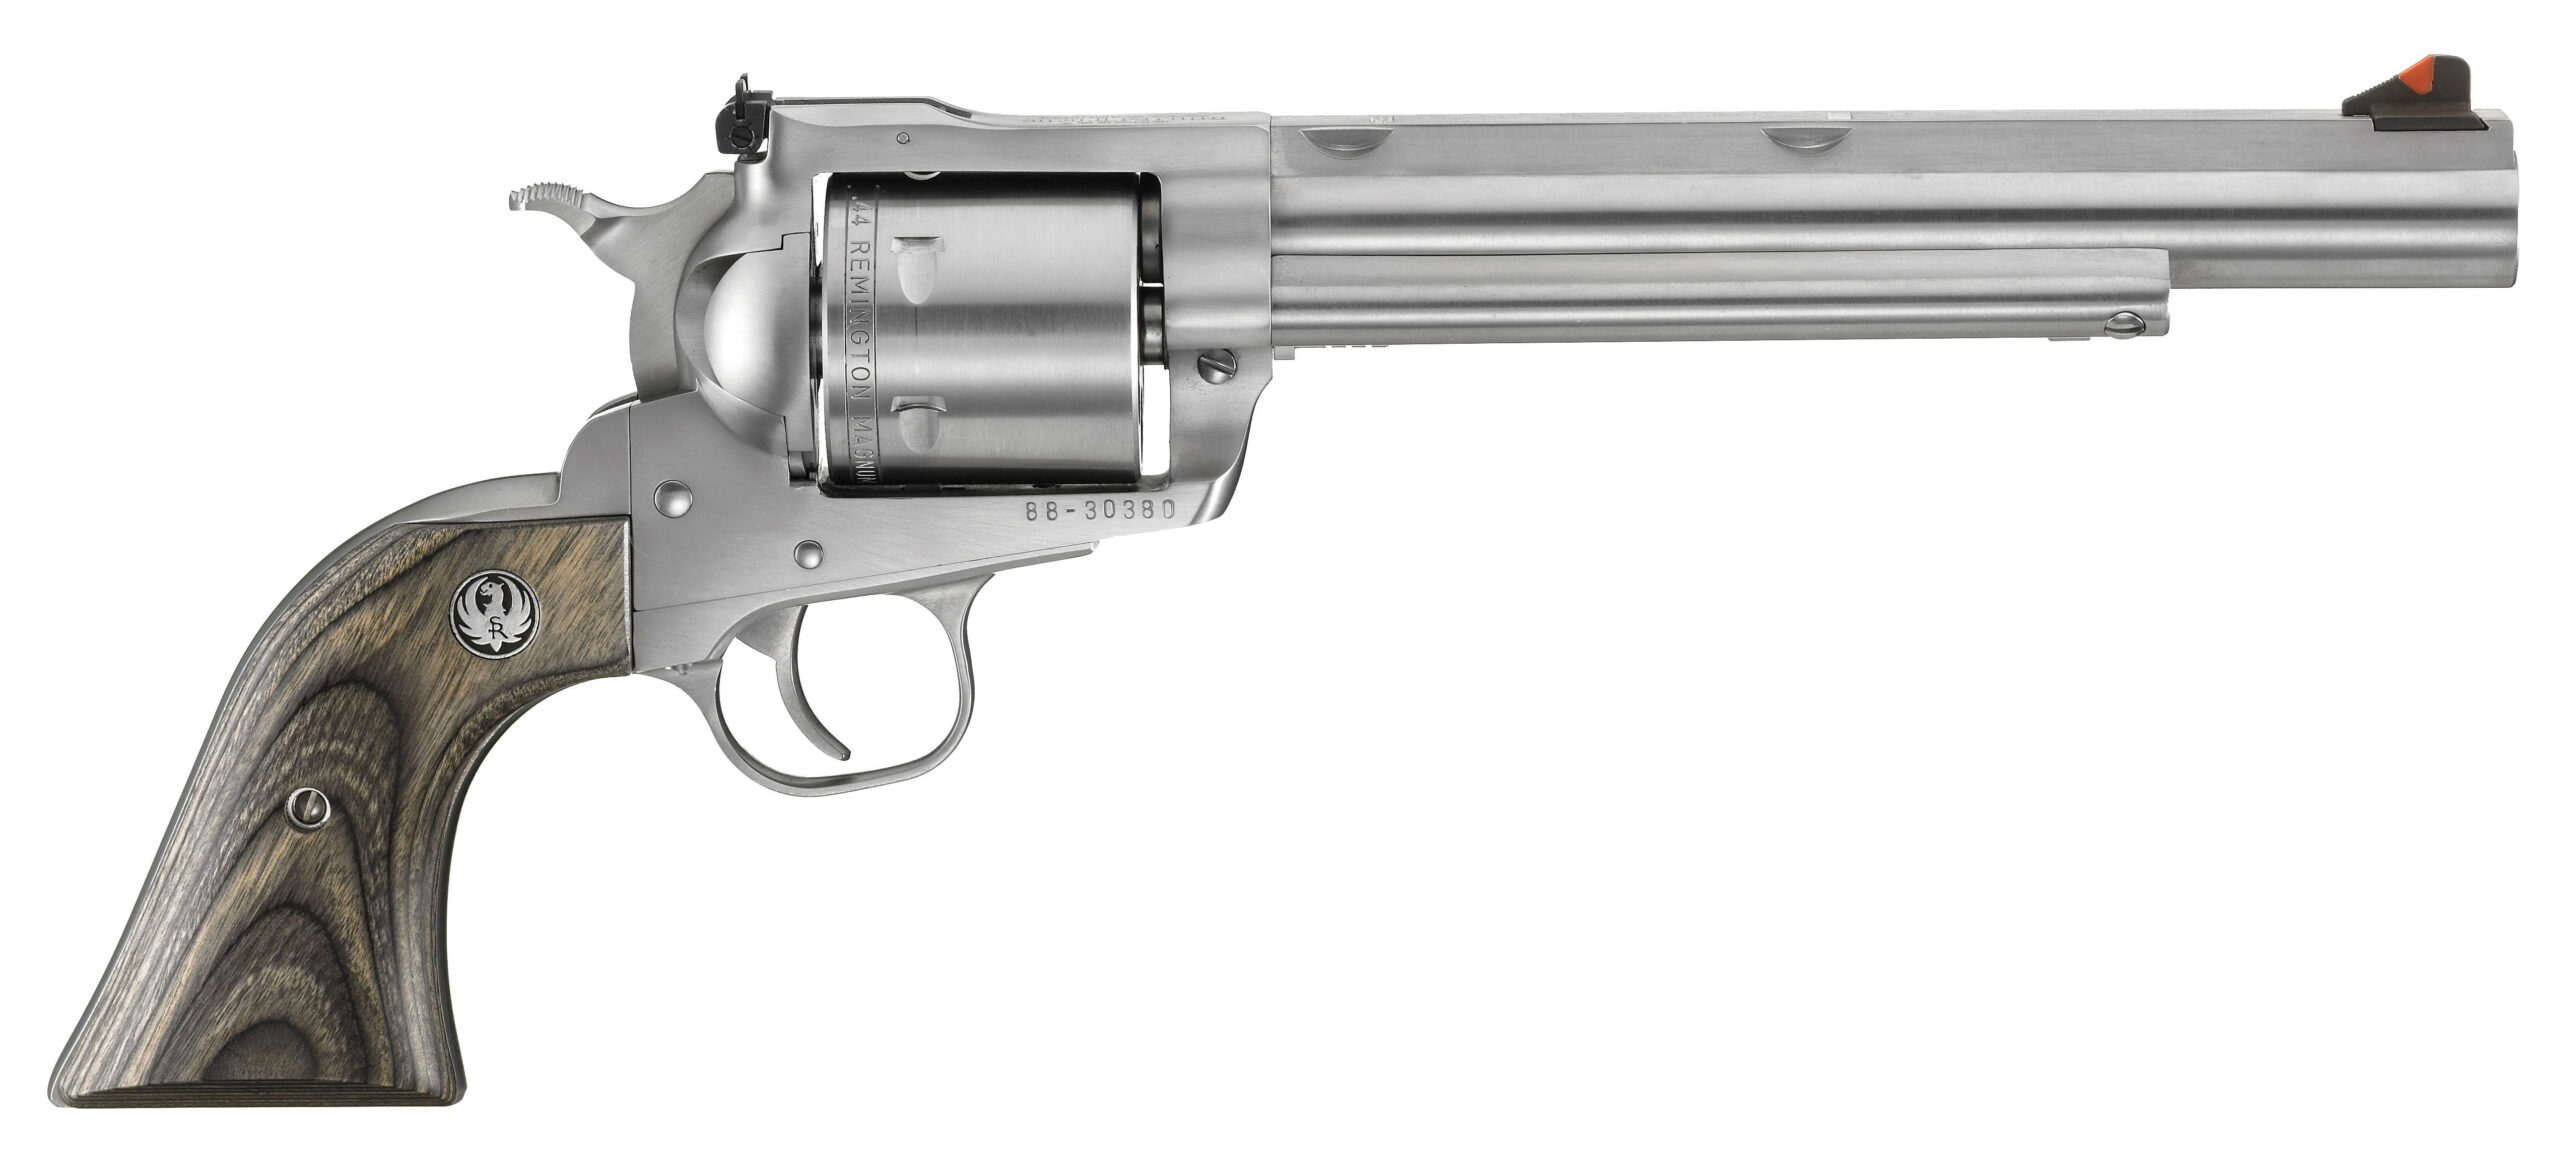 Ruger's Blackhawk line was first released in 1955.